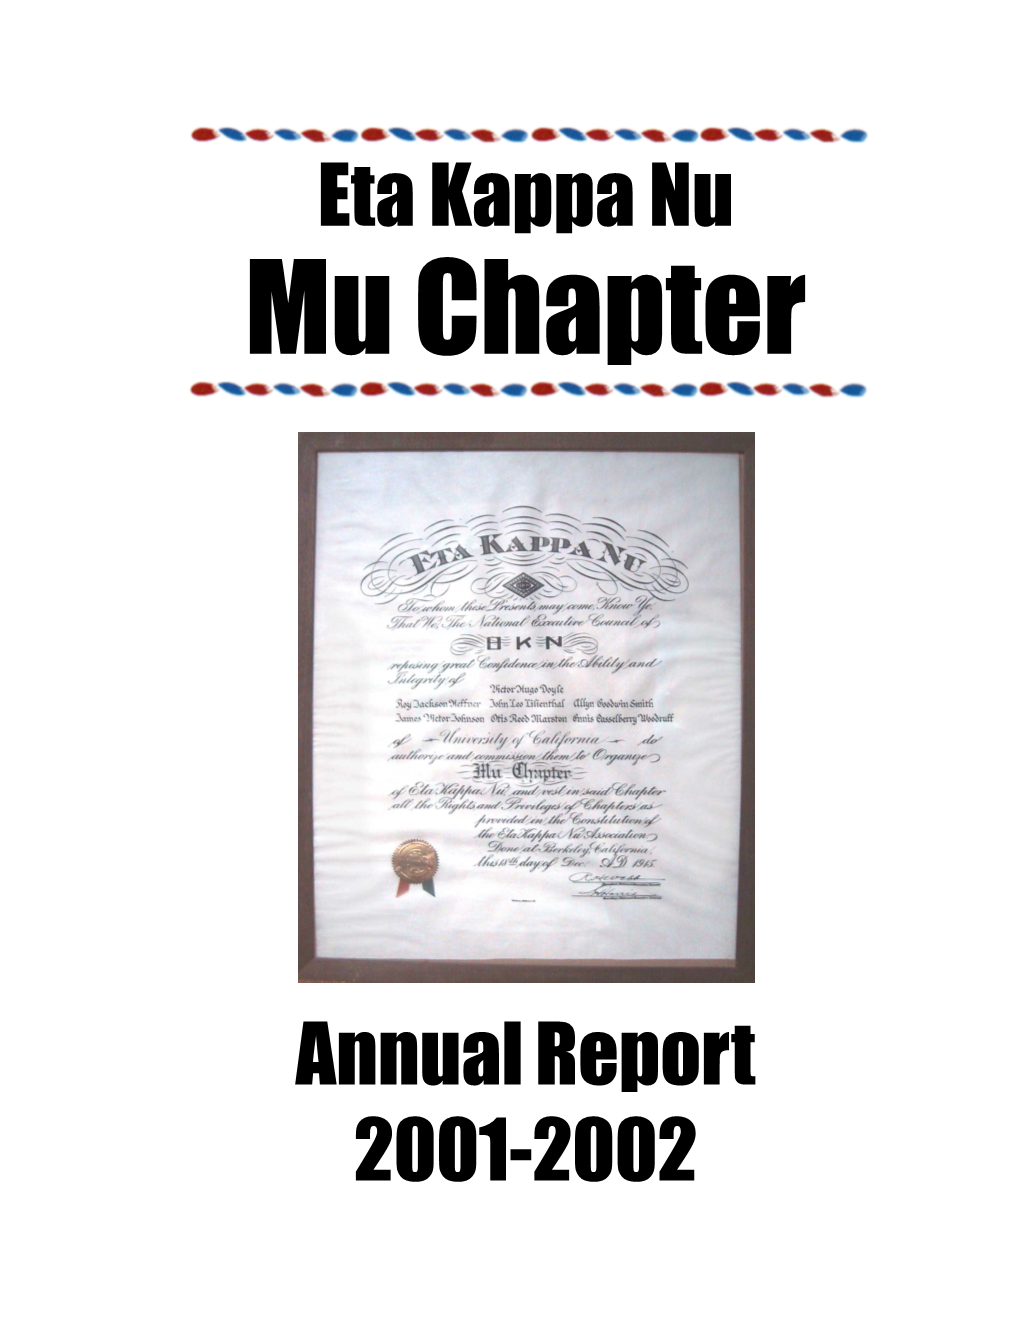 HKN Mu Chapter Annual Report, 2001-2002 Page 1 Community Service